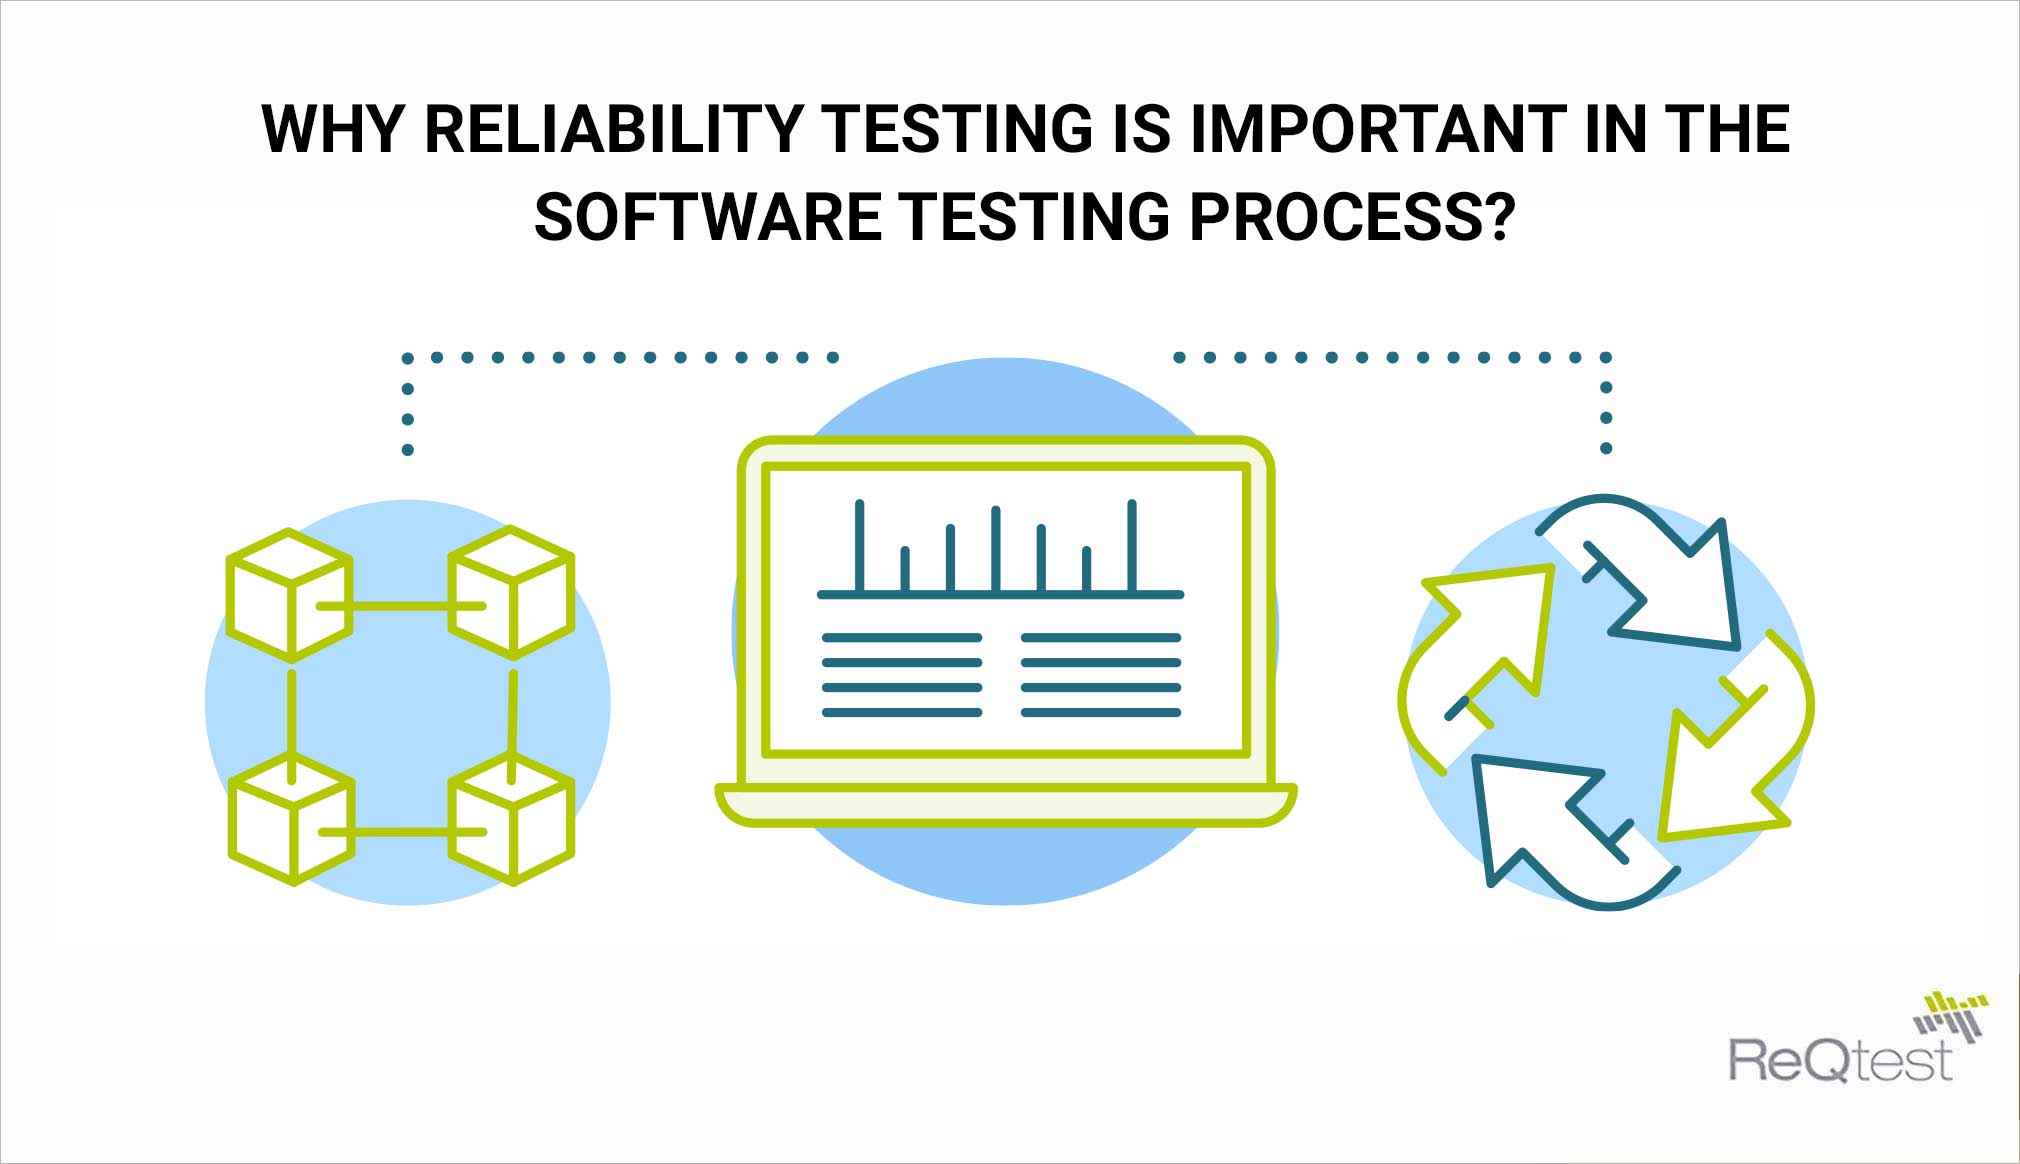 a process to ensure the reliability of test results